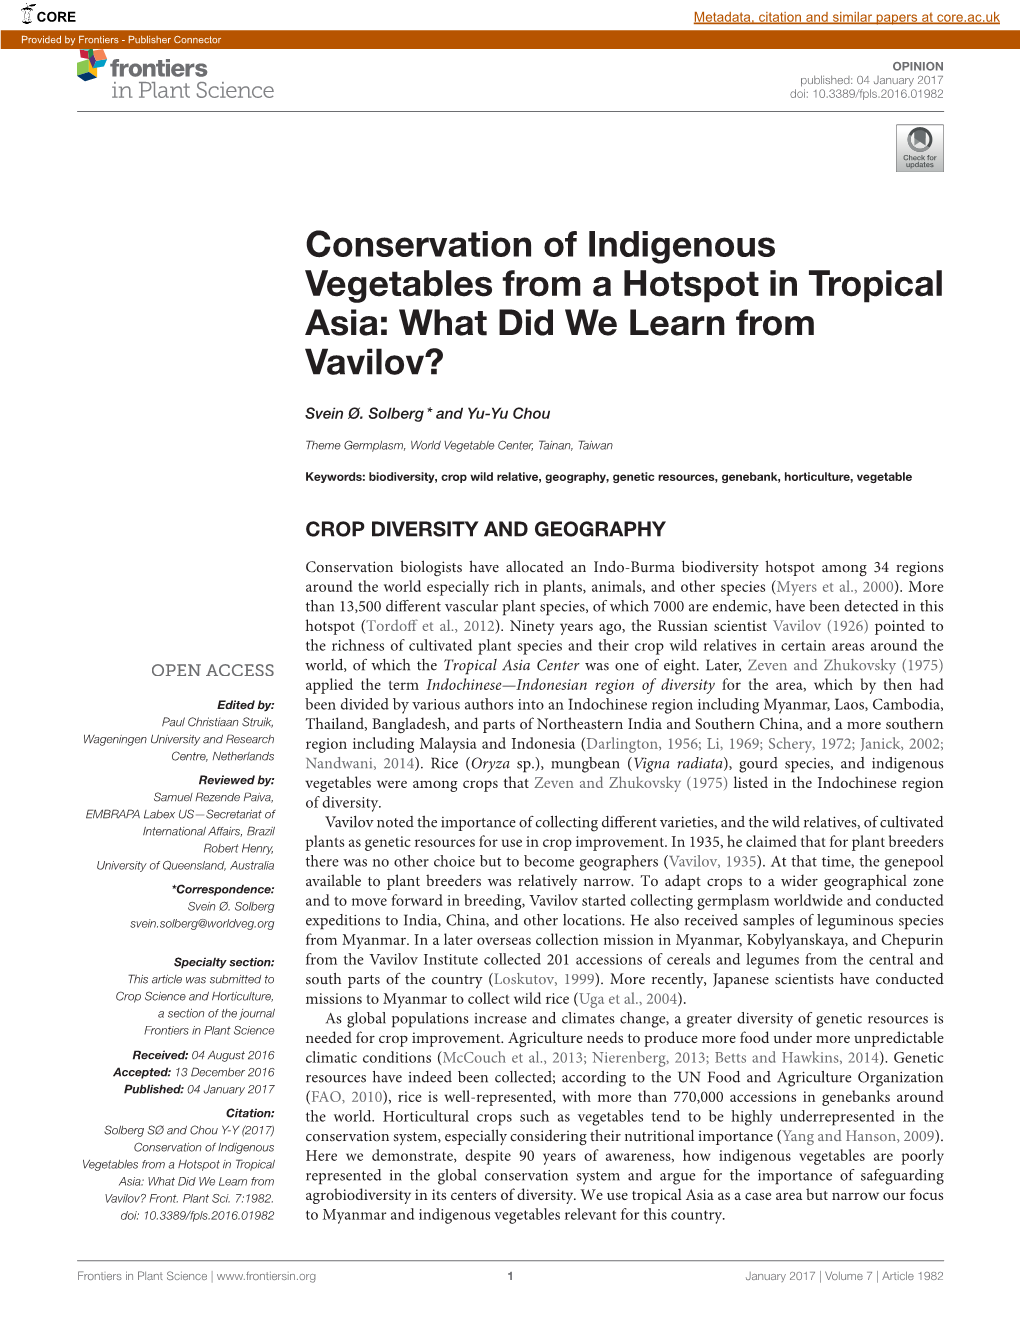 Conservation of Indigenous Vegetables from a Hotspot in Tropical Asia: What Did We Learn from Vavilov?